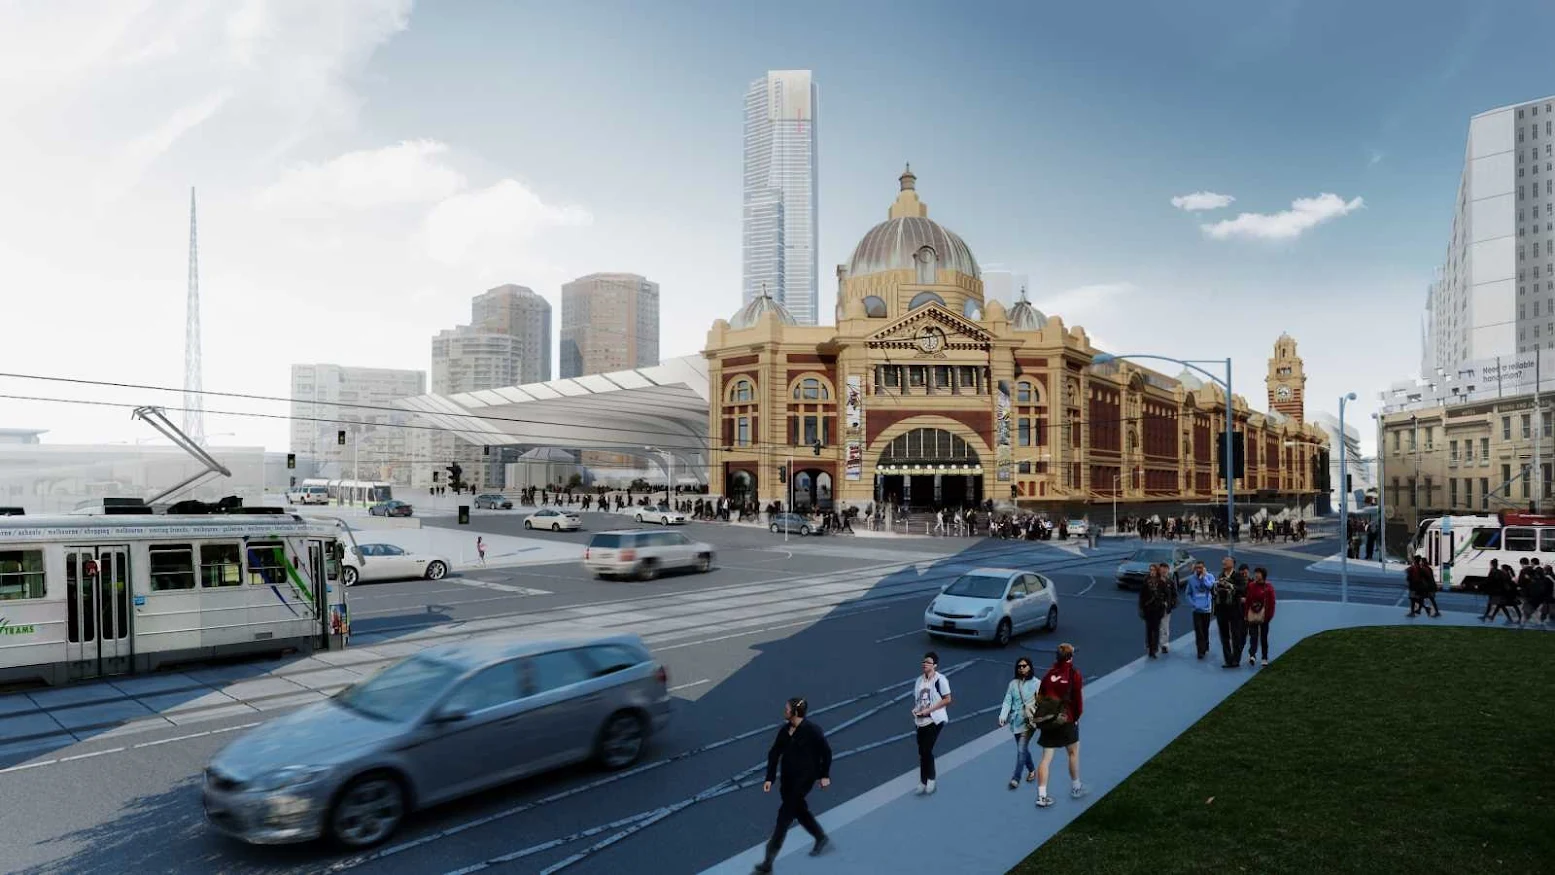 07-Flinders-Street-Station-Design-Competition-by-Zaha-Hadid+BVN-Architecture